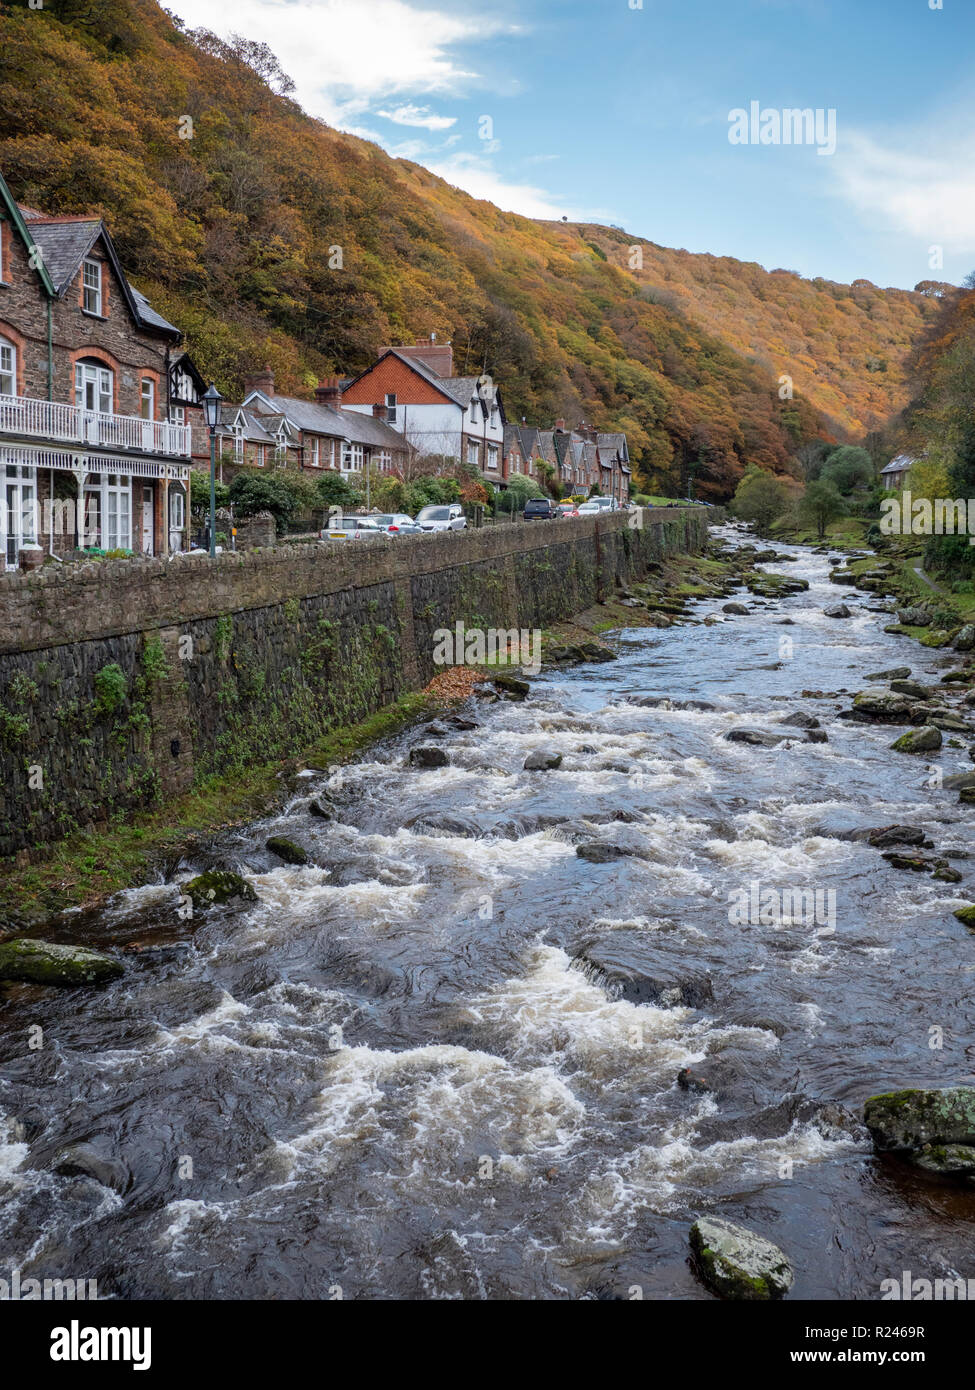 Houses and buildings on the steep valley sides at Lynmouth Devon UK in autumn Stock Photo